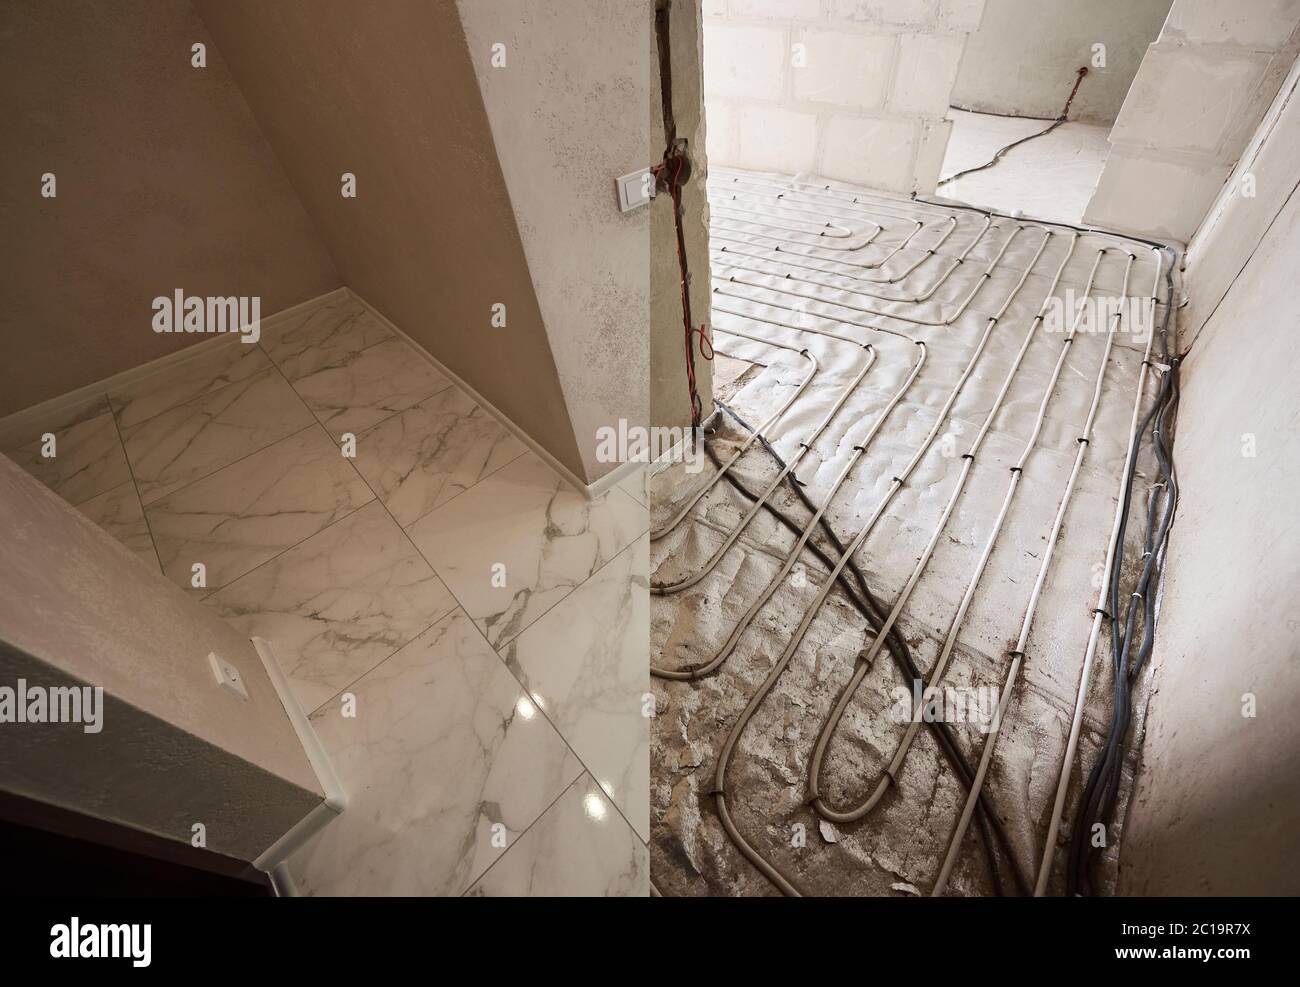 Snapshot of floor before and after renovation. Warm floor in every part of apartment, floor heating pipe system before and after tile layer. Concept of apartment renovation and restoration. Stock Photo